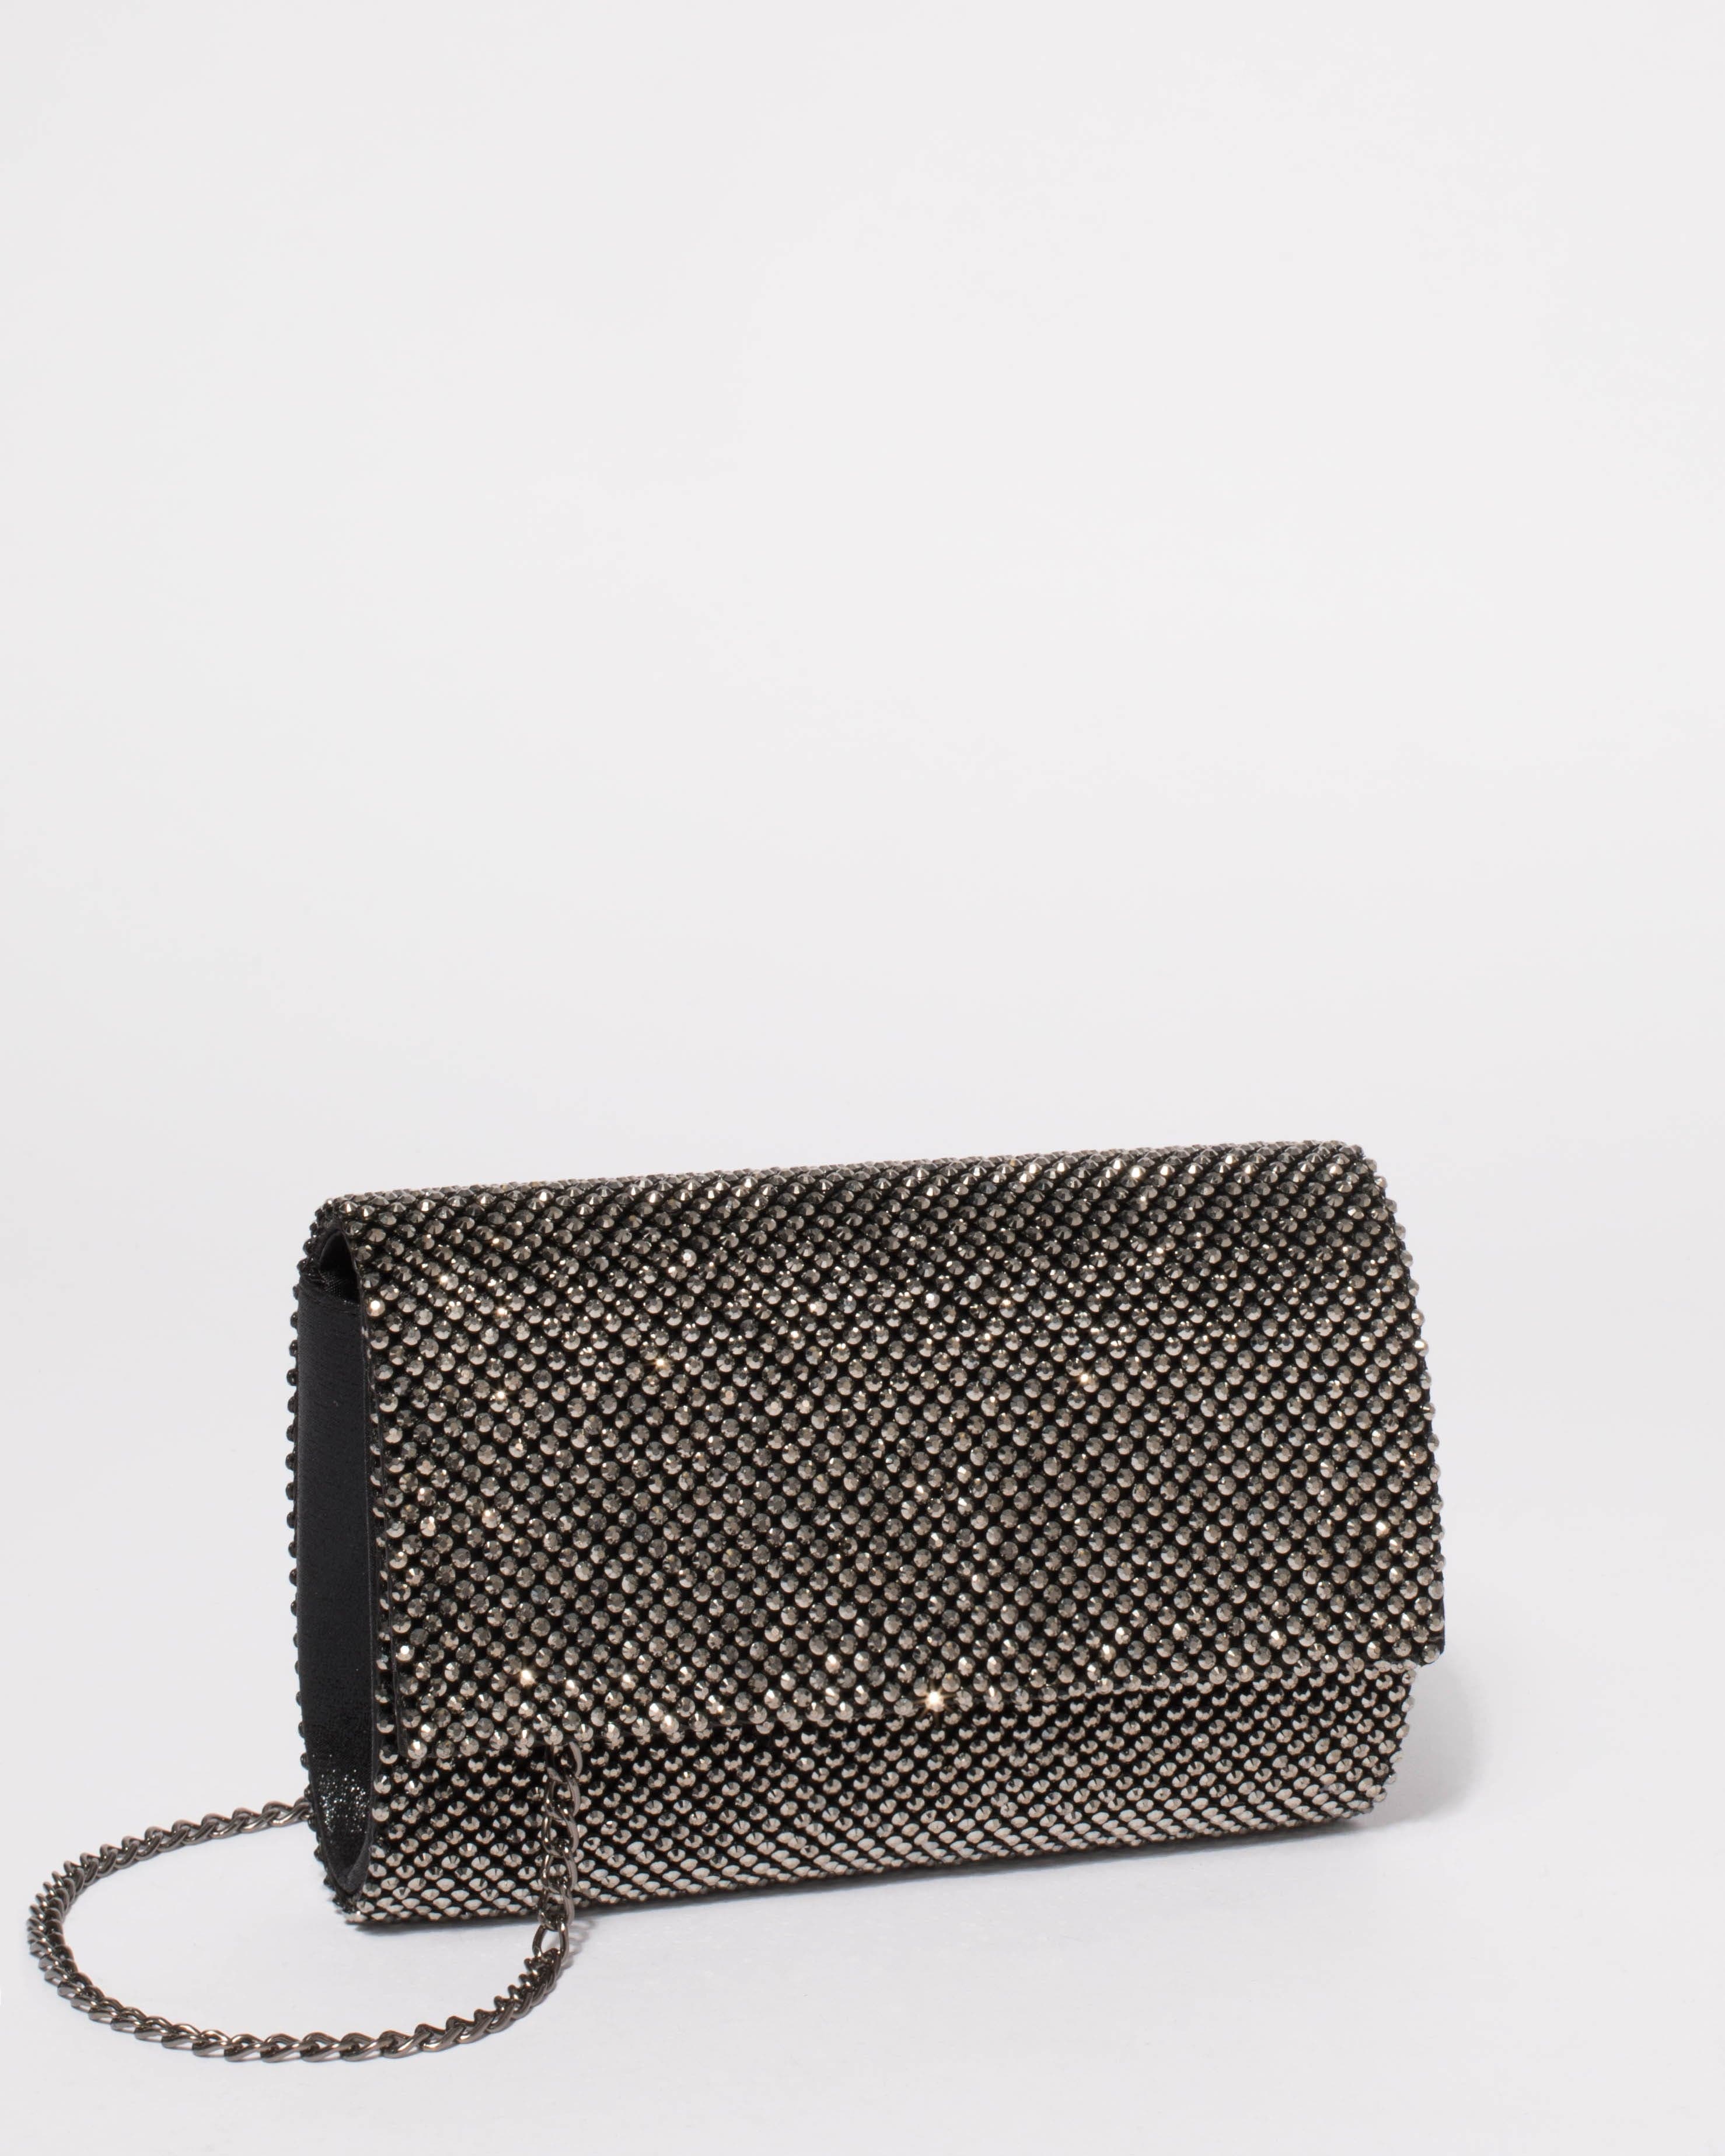 Evening Bags | Bridal Bags | Prom Bags | Classic Evening Bags Carlo Fellini  - Gina Evening Bag (N 023) (Pewter)